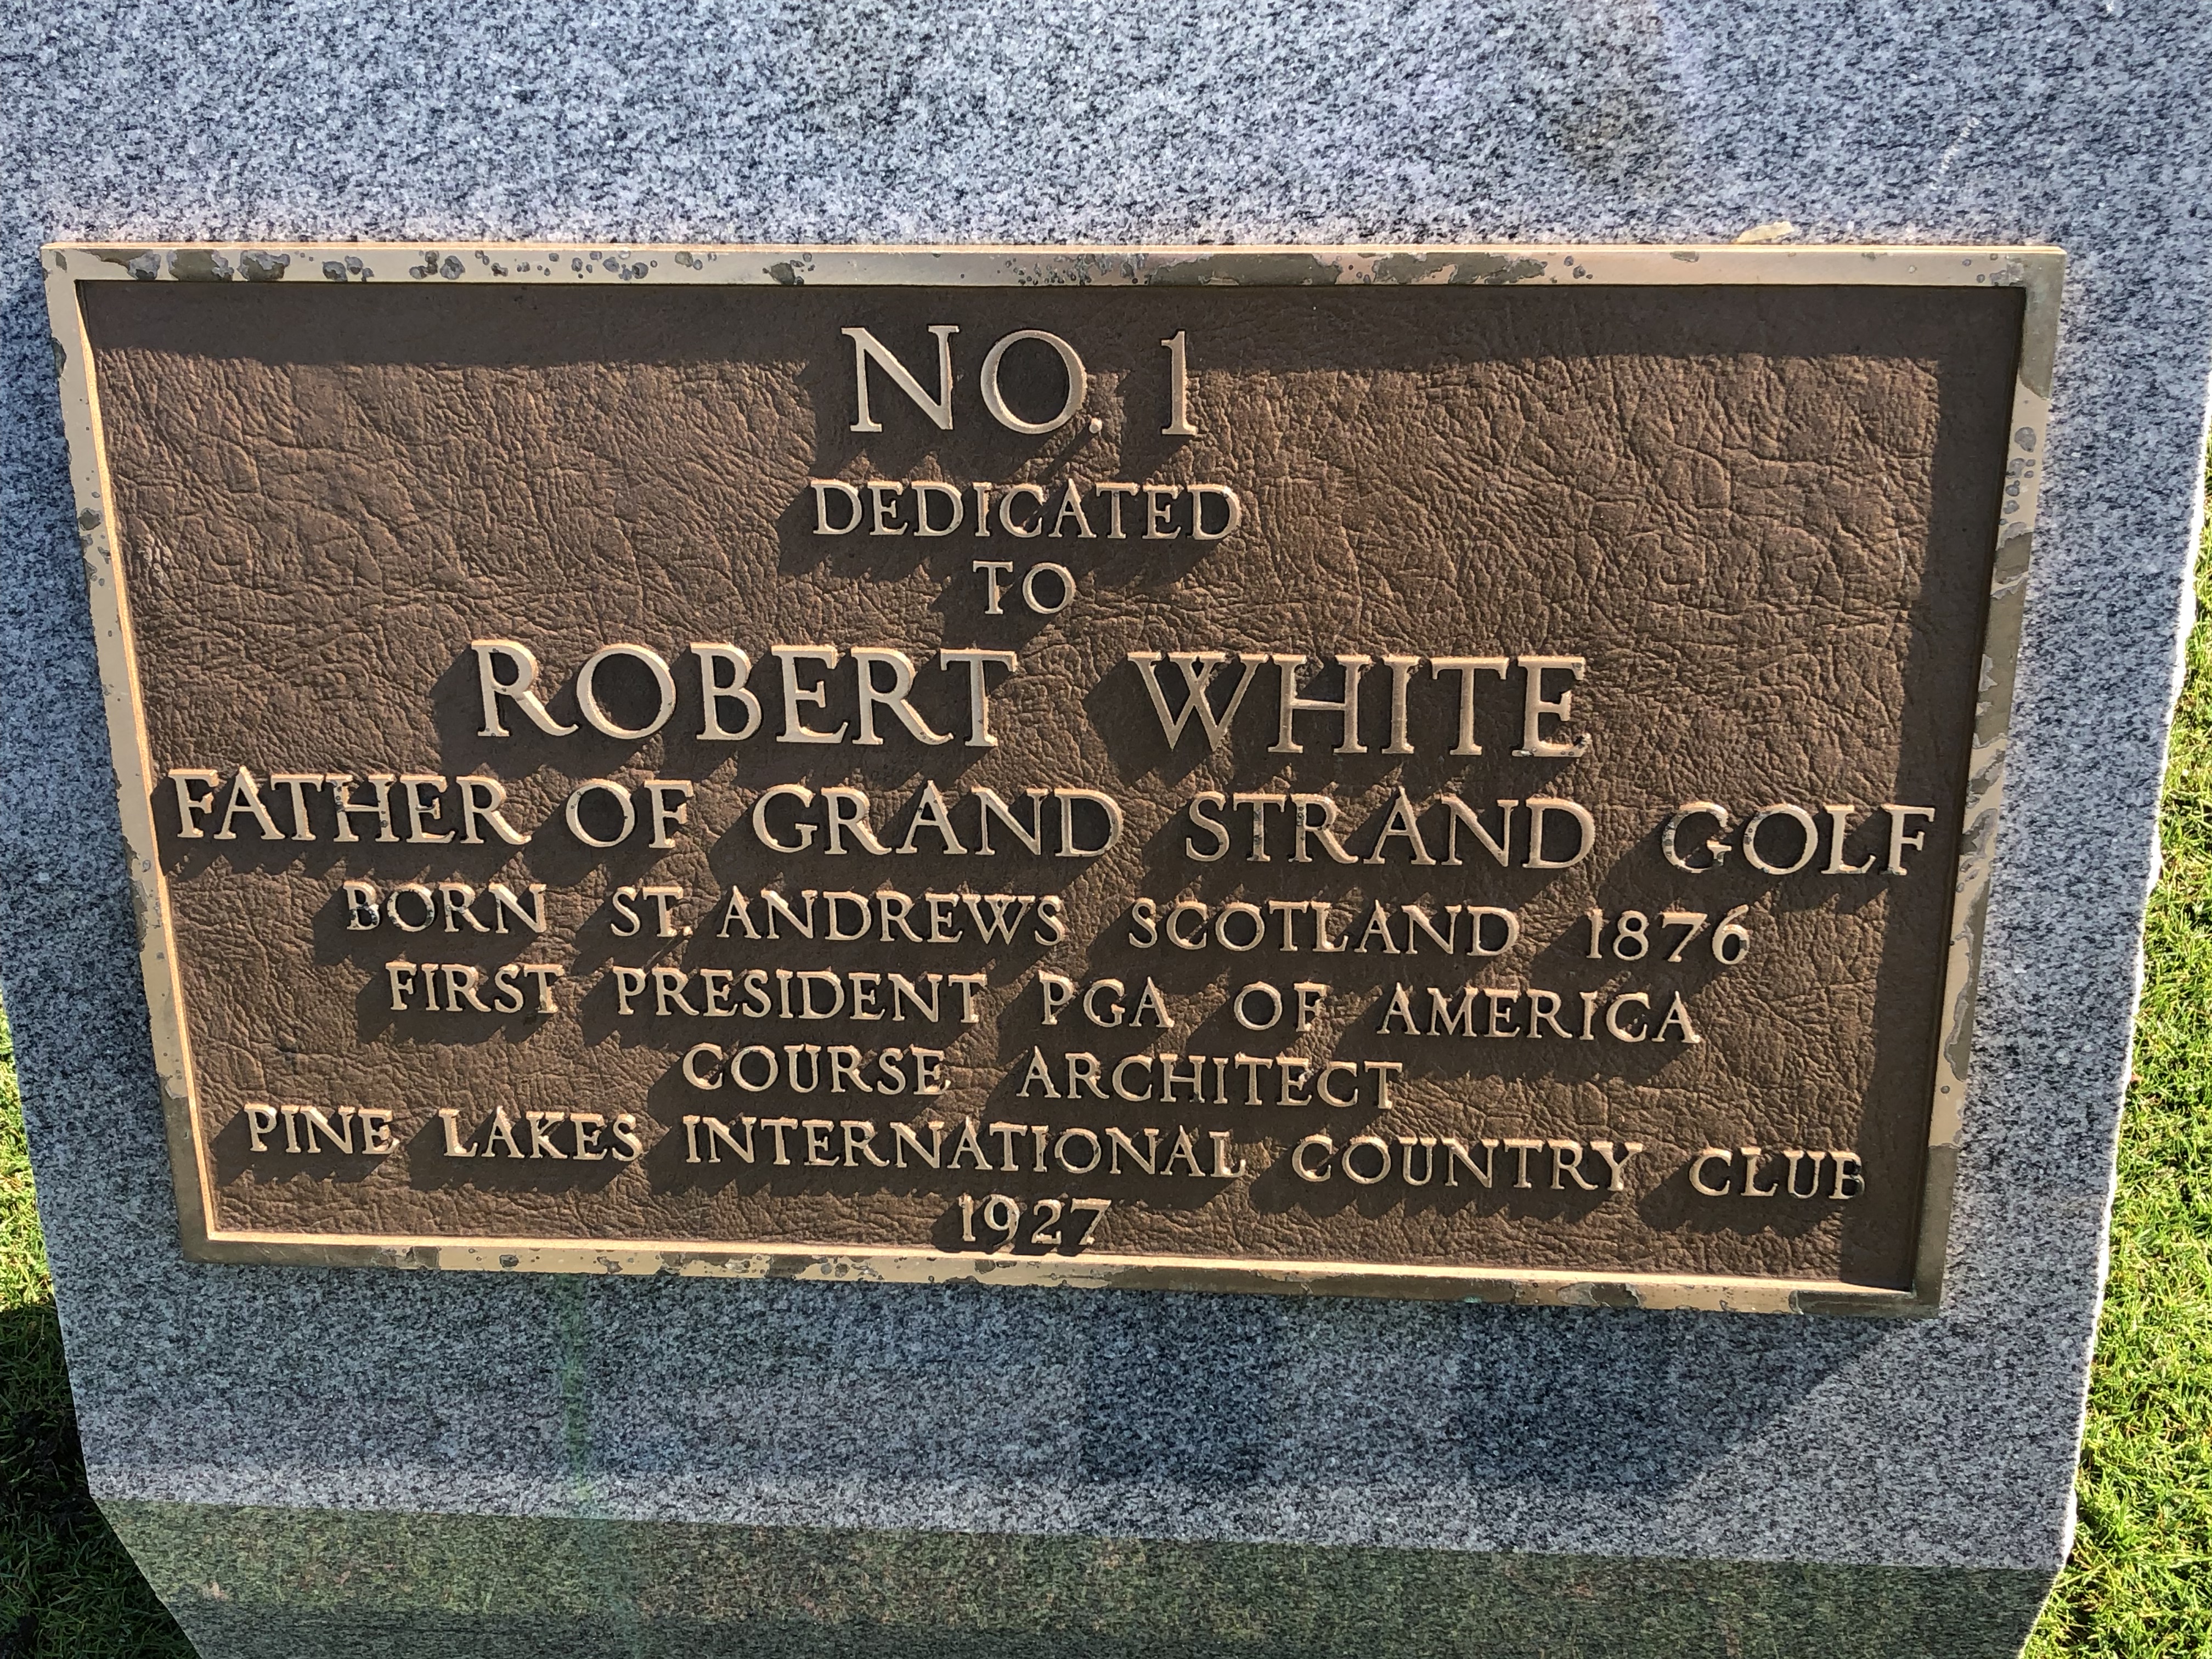 Robert White Marker at Pine Lakes Country Club